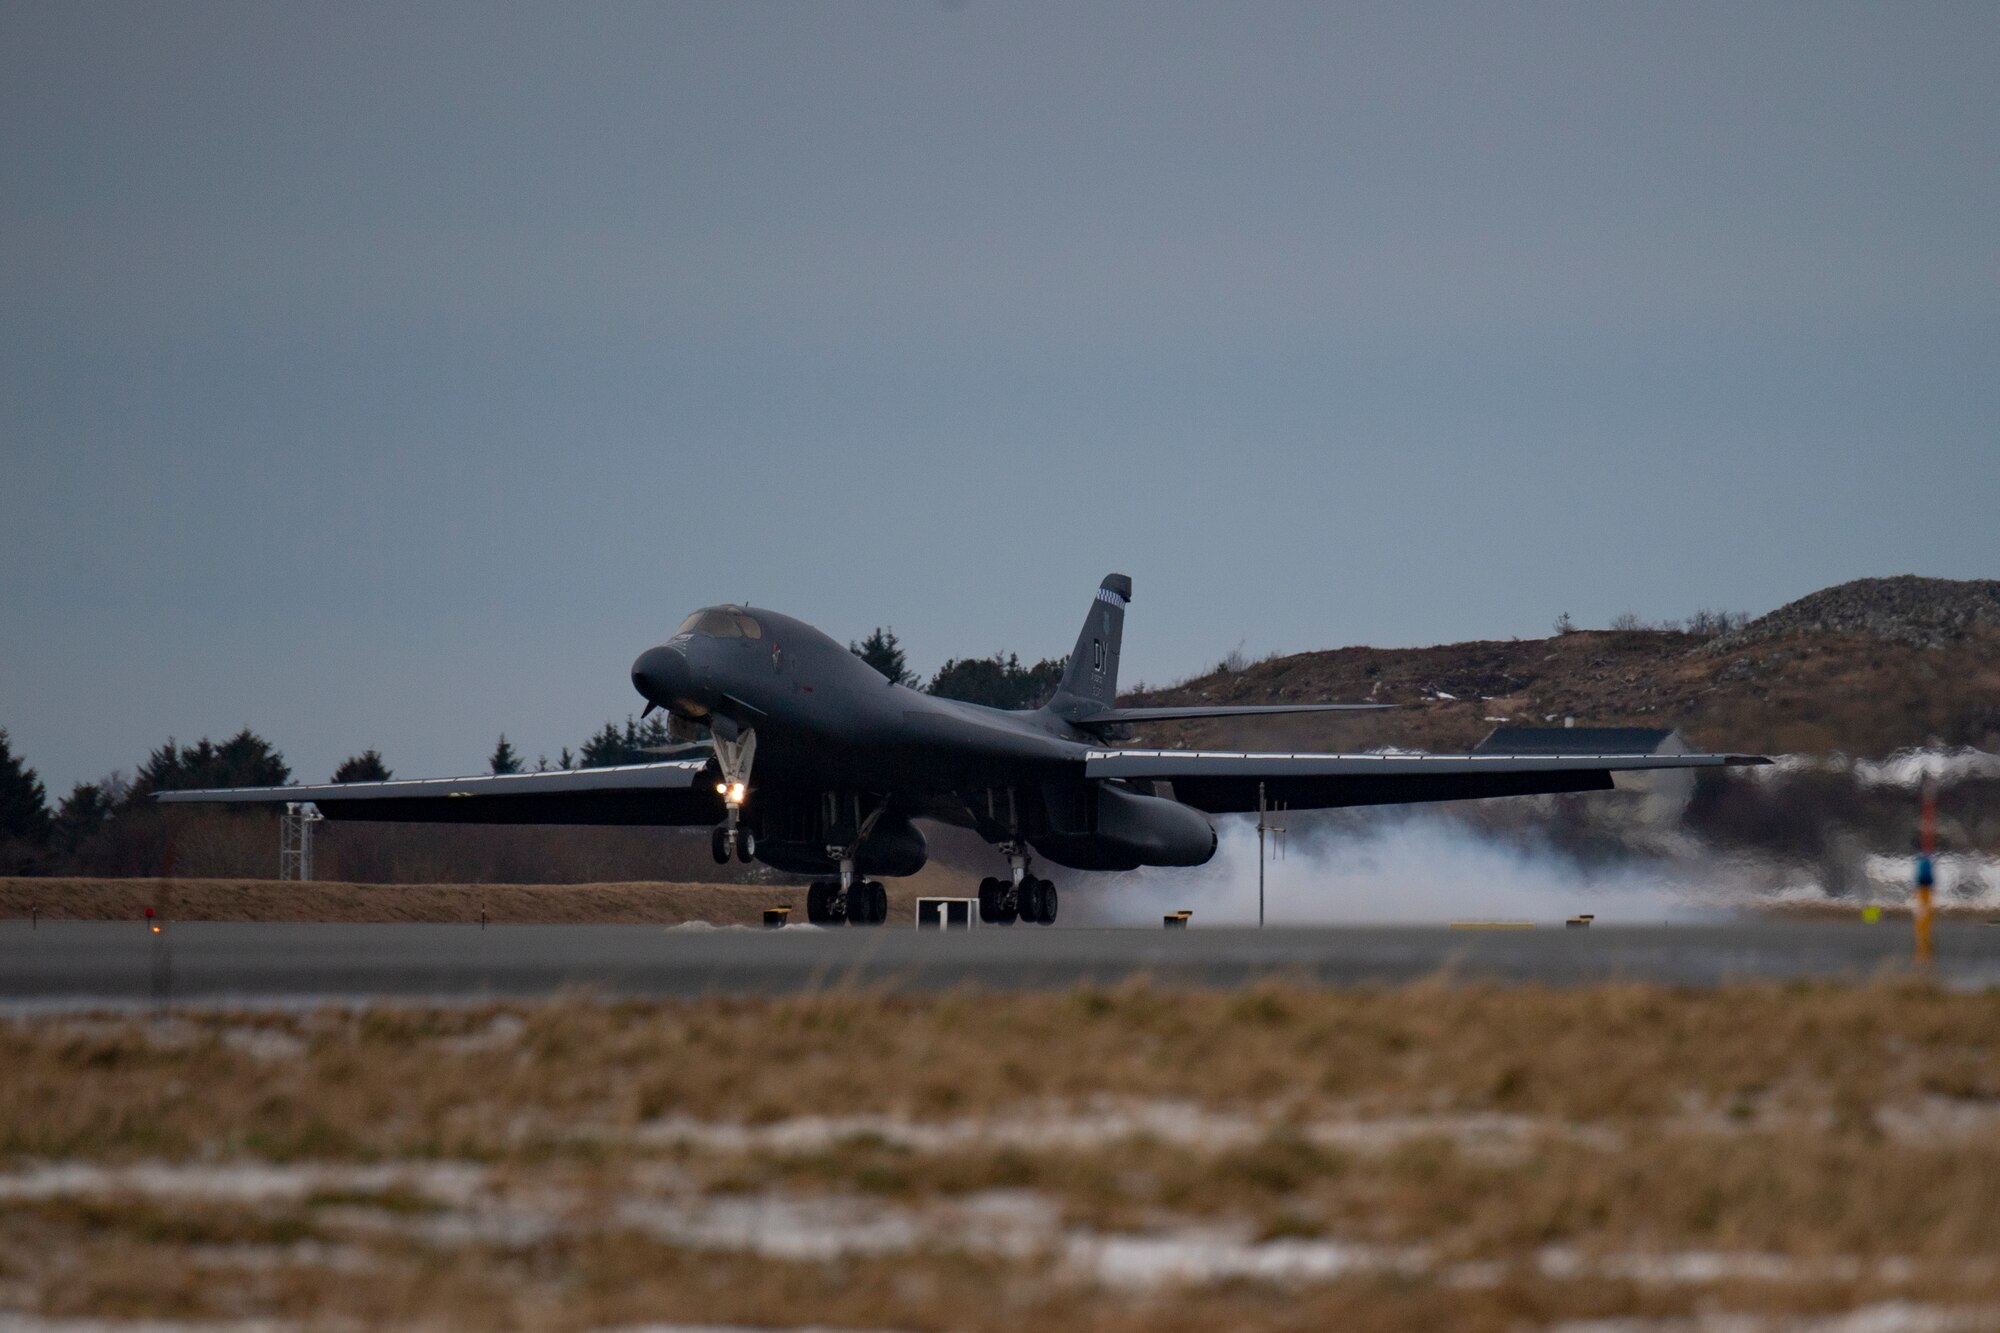 A B-1B Lancer assigned to the 9th Expeditionary Bomb Squadron arrives at Ørland Air Force Station, Norway, in support of a Bomber Task Force deployment, Feb. 22, 2021. The 9th EBS is the first bomber squadron to deploy to and operate out of Norway. Norway is a key U.S. ally in the Arctic and North Atlantic region, and a strong partner in fostering regional security and prosperity. (U.S. Air Force photo by Airman 1st Class Colin Hollowell)